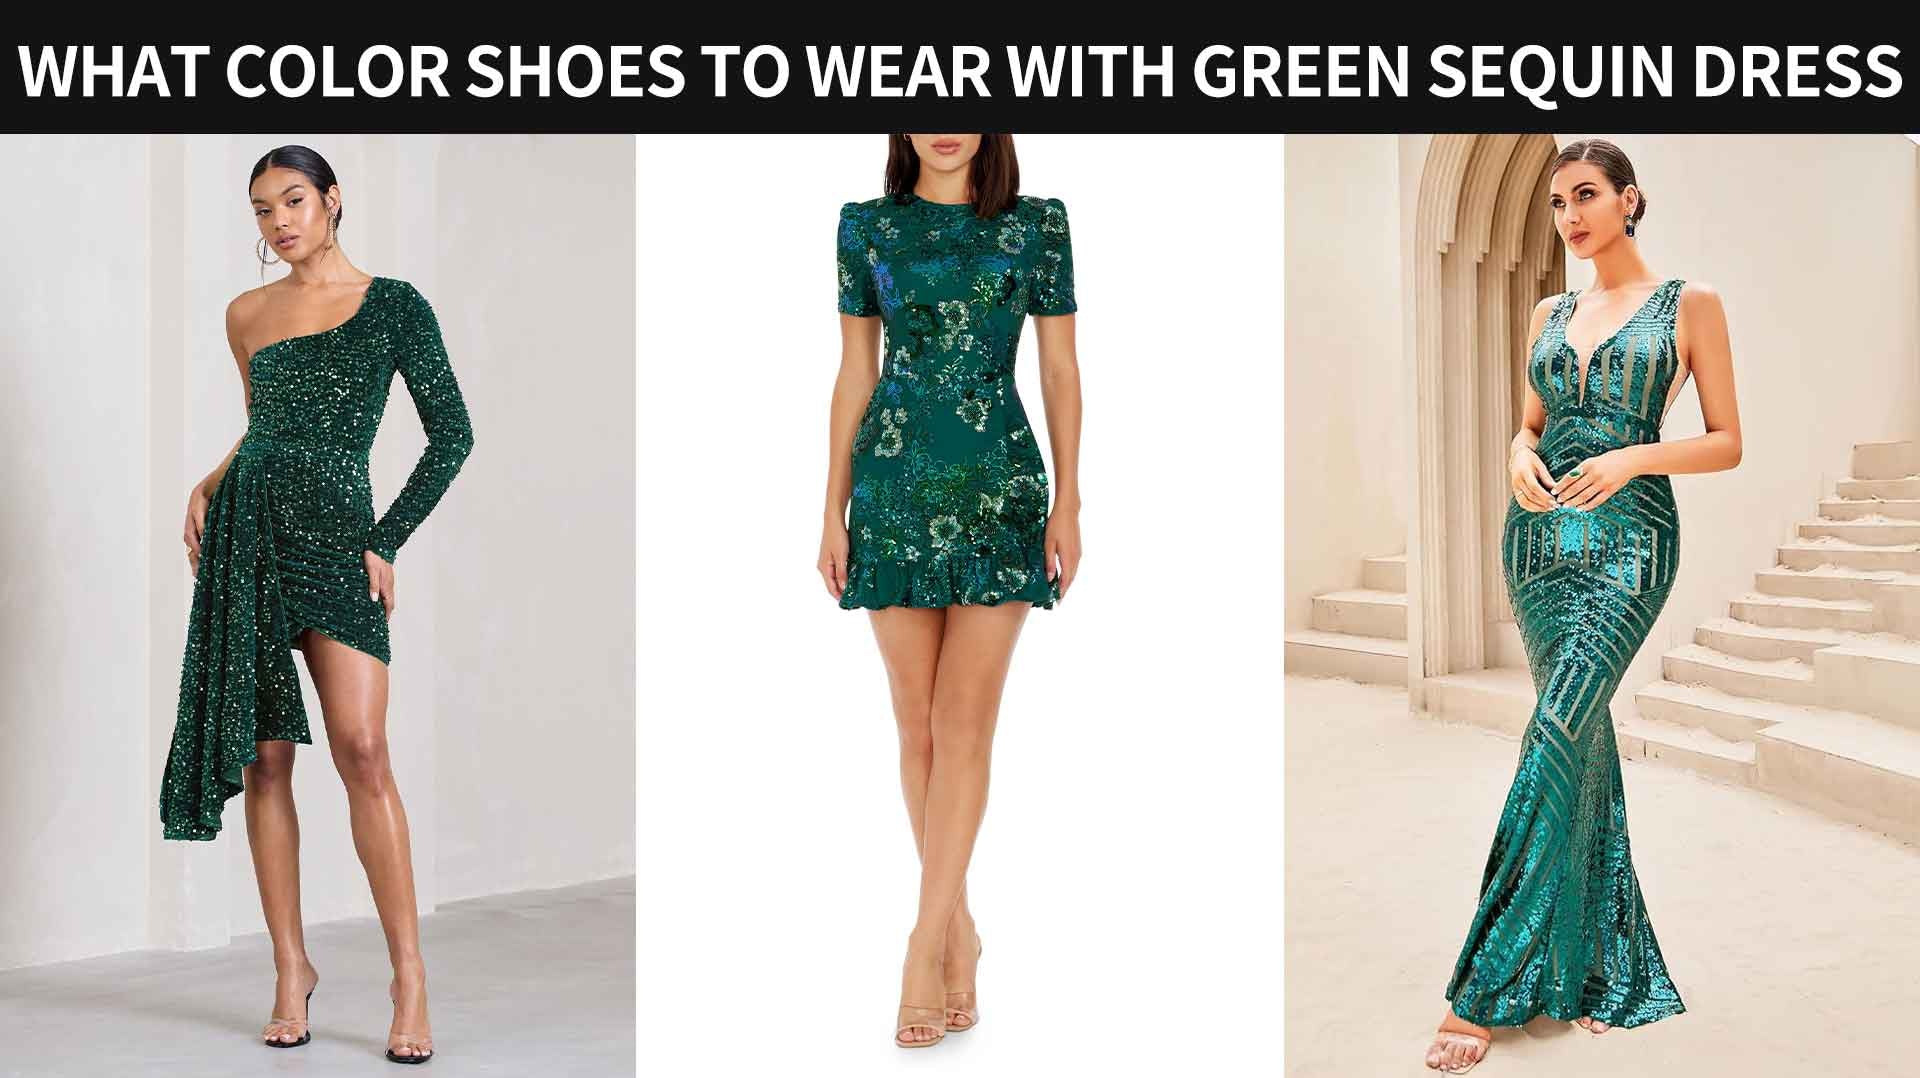 What Color Shoes To Wear With Green Sequin Dress？